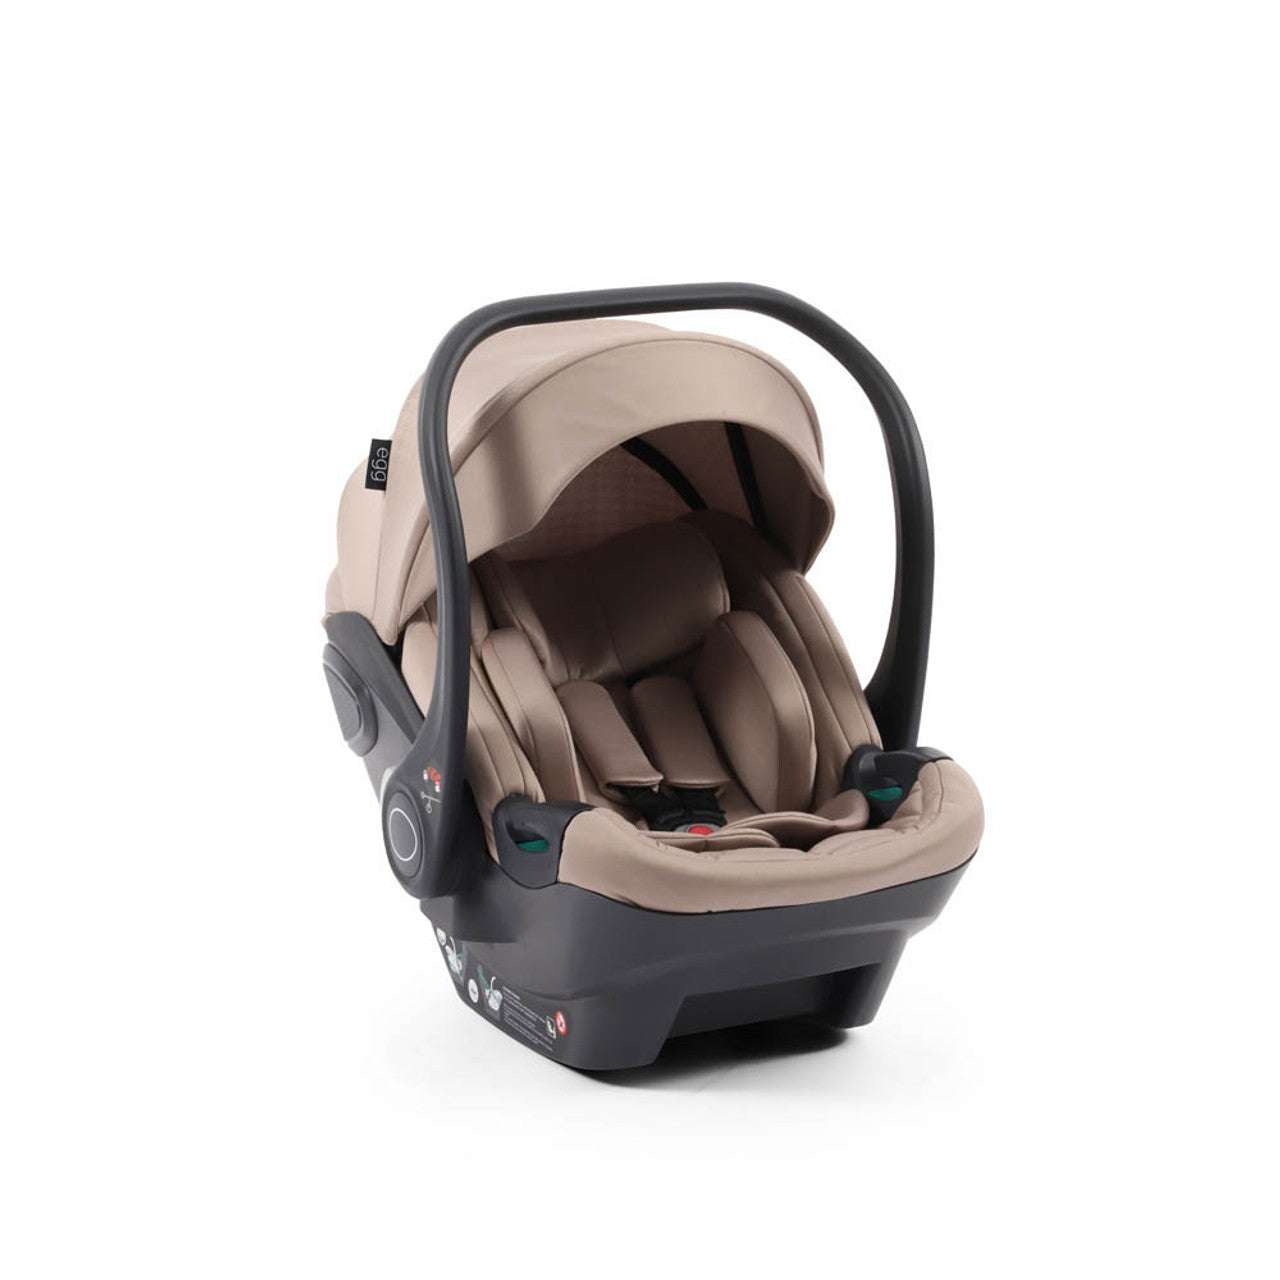 Egg Shell I-Size Newborn Car Seat - Houndstooth Almond